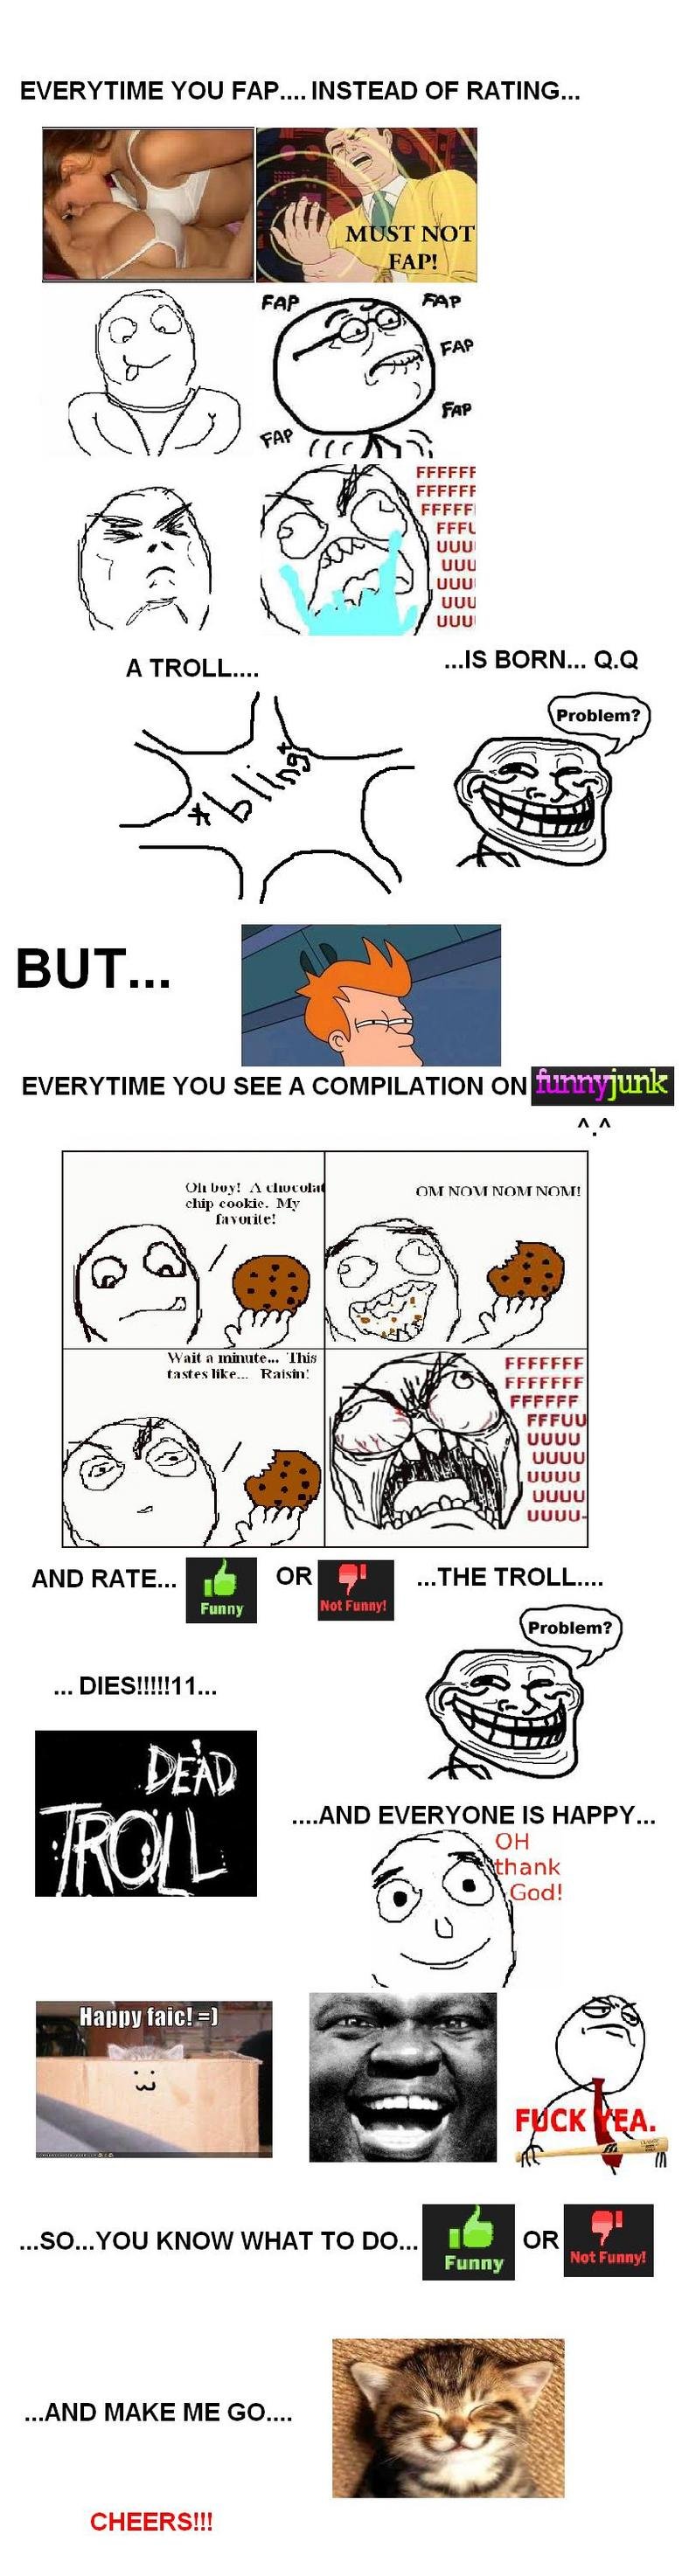 Troll Story. please rate... thanks. EVERYTIME YOU FAP.... INSTEAD OF RATING... FFCCFF FFCCFF FOFL AUU cuul AUU fluty EVERYTIME YOU SEE A COMPILATION 01- buy! A 